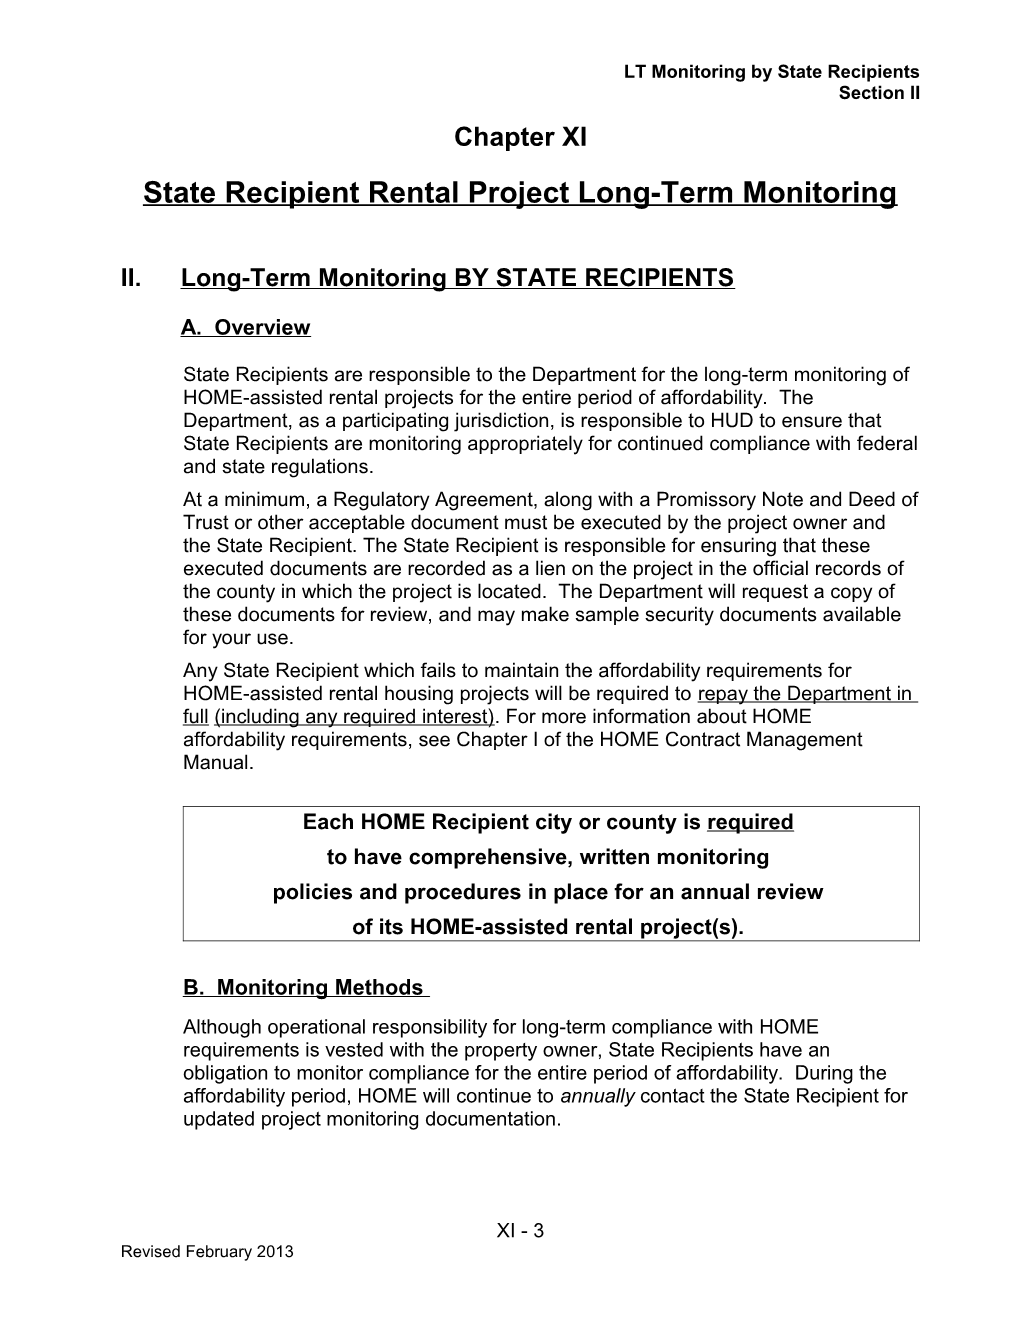 State Recipient Rental Project Long Term Monitoring